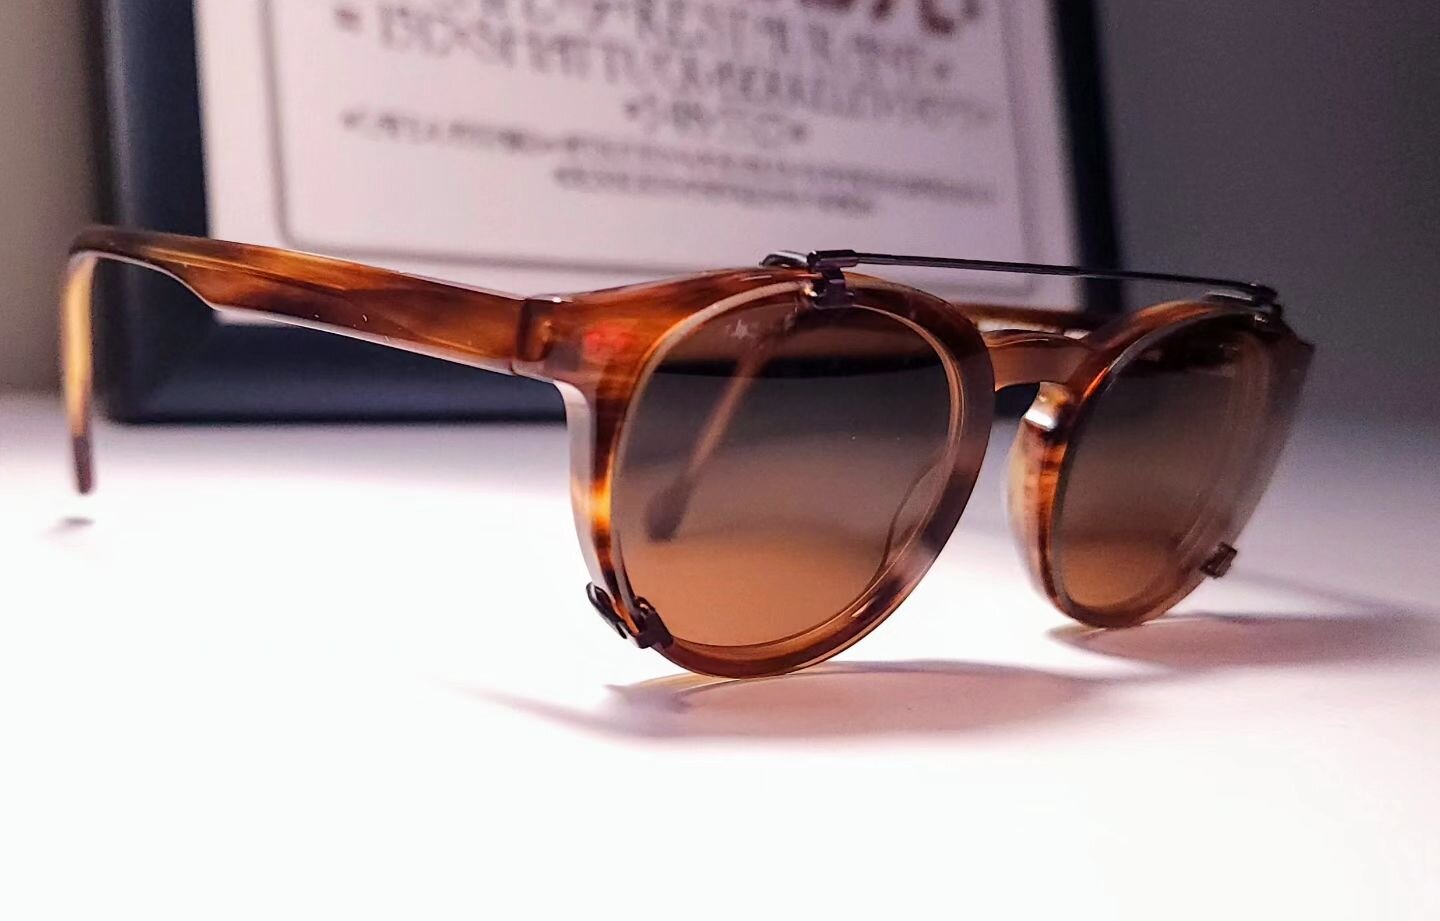 Our clip of the week goes to this Brown E3 Clip in Chocolate. It looks perfectly matched with this Anne et Valentin frame! 😍 

#clipoftheweek #eclips #clipon #polarized #polarizedclipons #polarizedclipon ##clip #bayarea #smallbusiness #shoplocal #ca